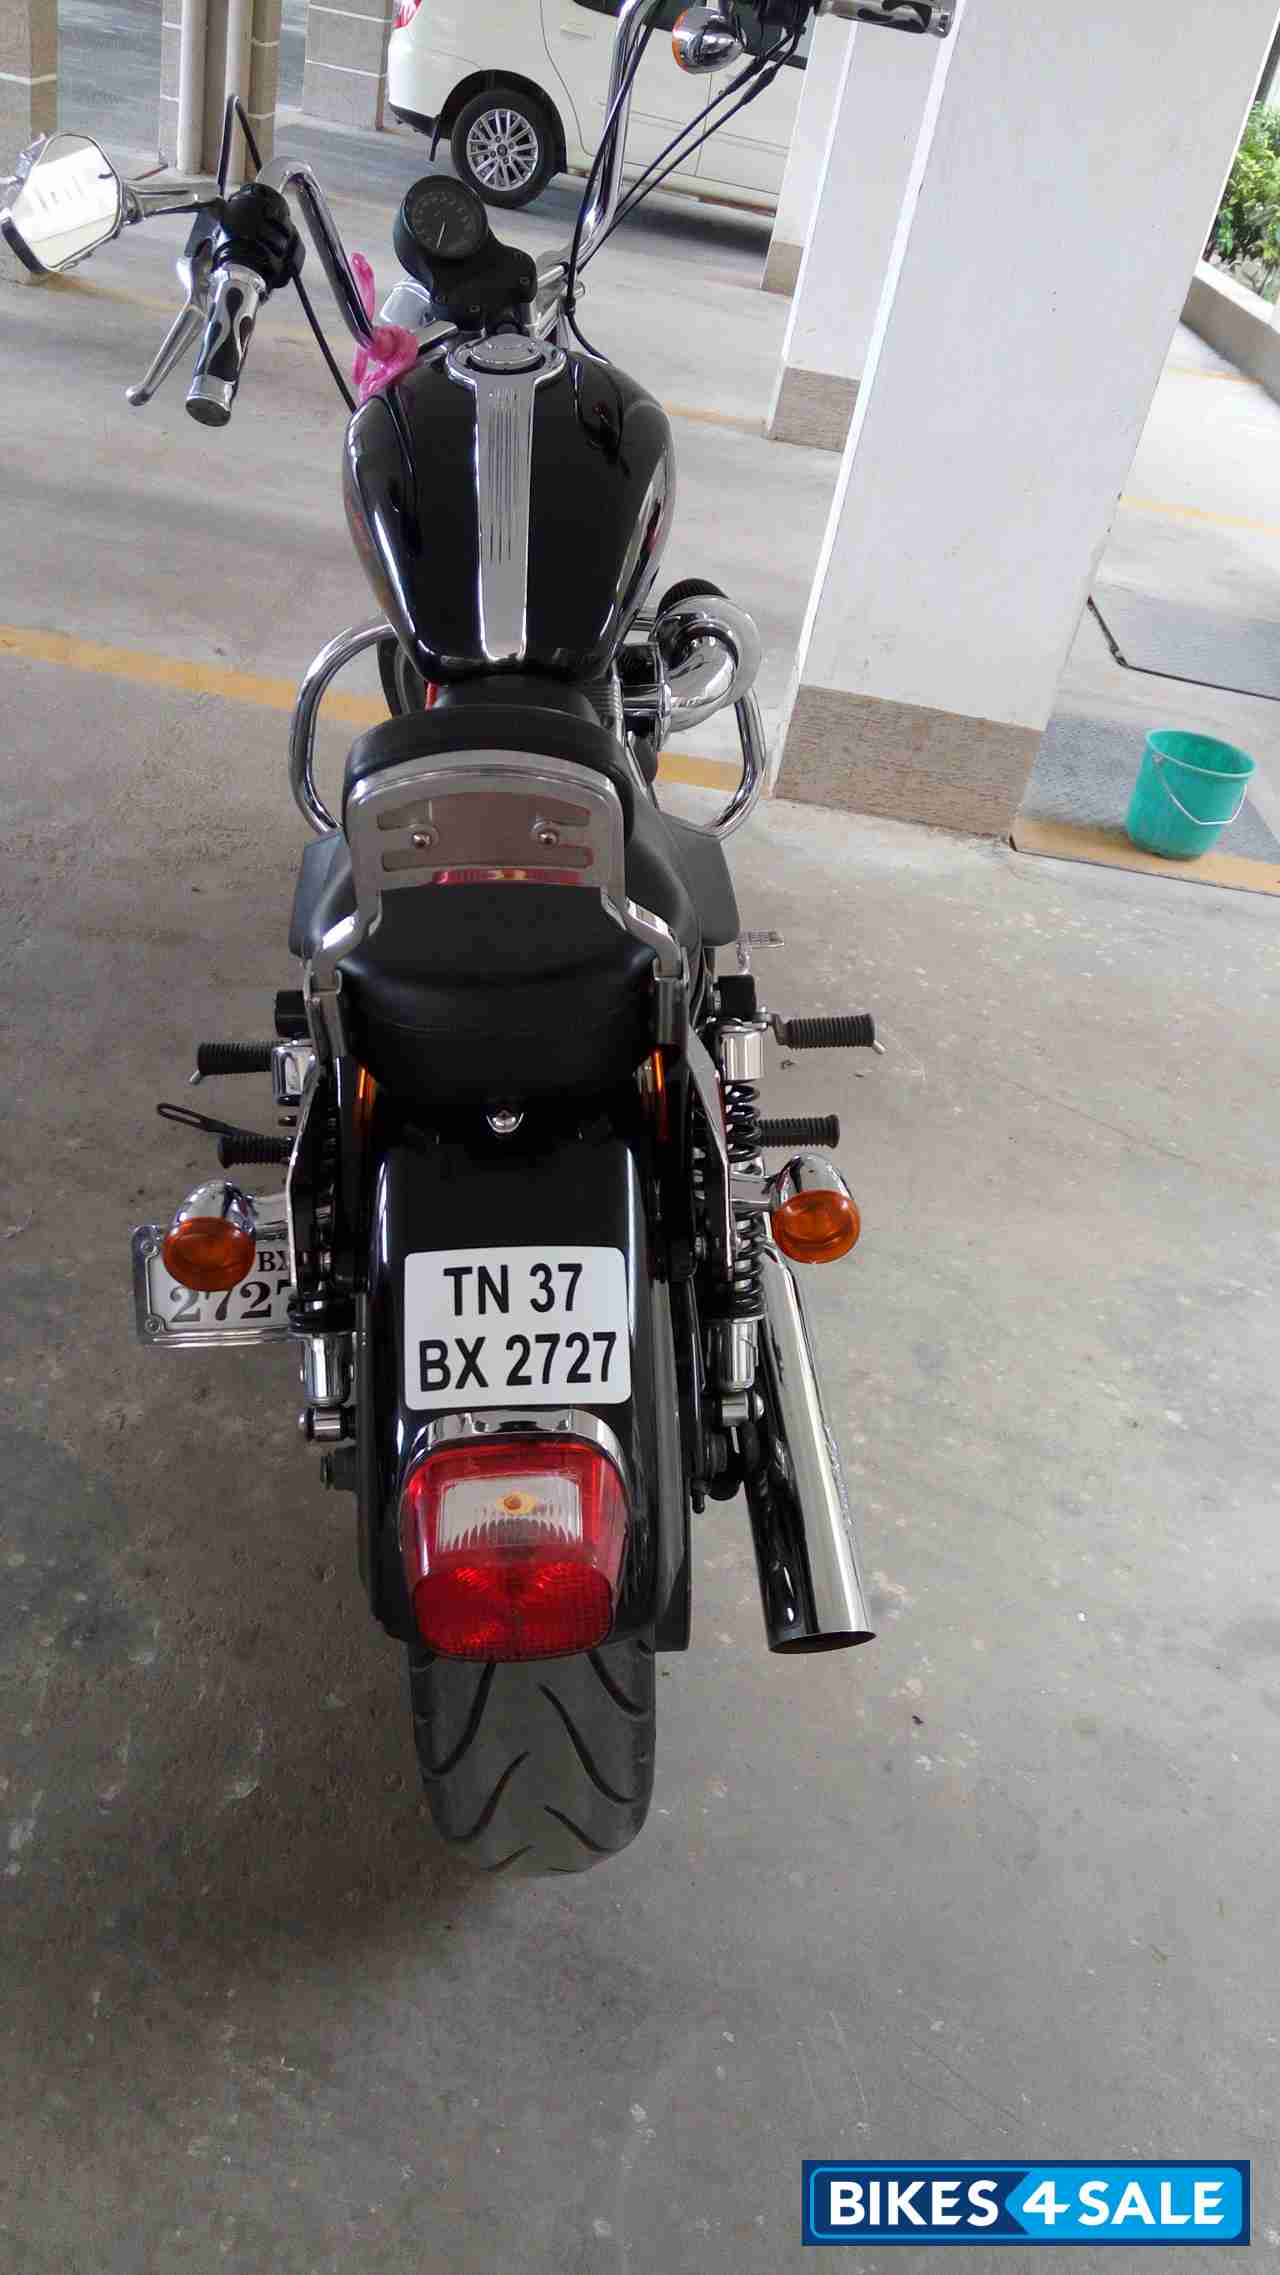 Used 2013 Model Harley Davidson Superlow For Sale In Coimbatore Id 305869 Bikes4sale